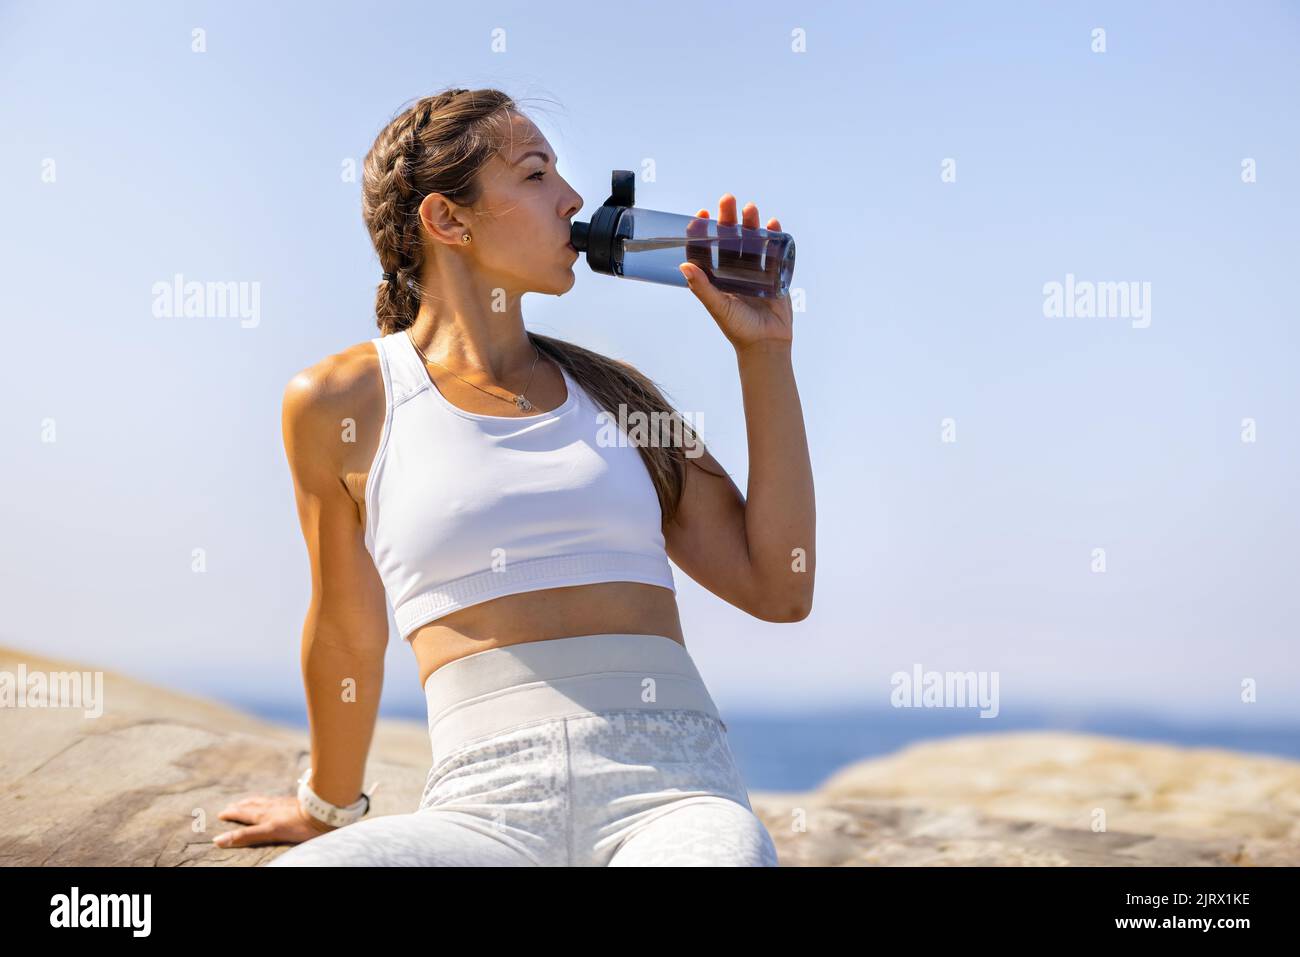 Female Athlete Drinking Water During Outdoor Workout by the Sea Stock Photo